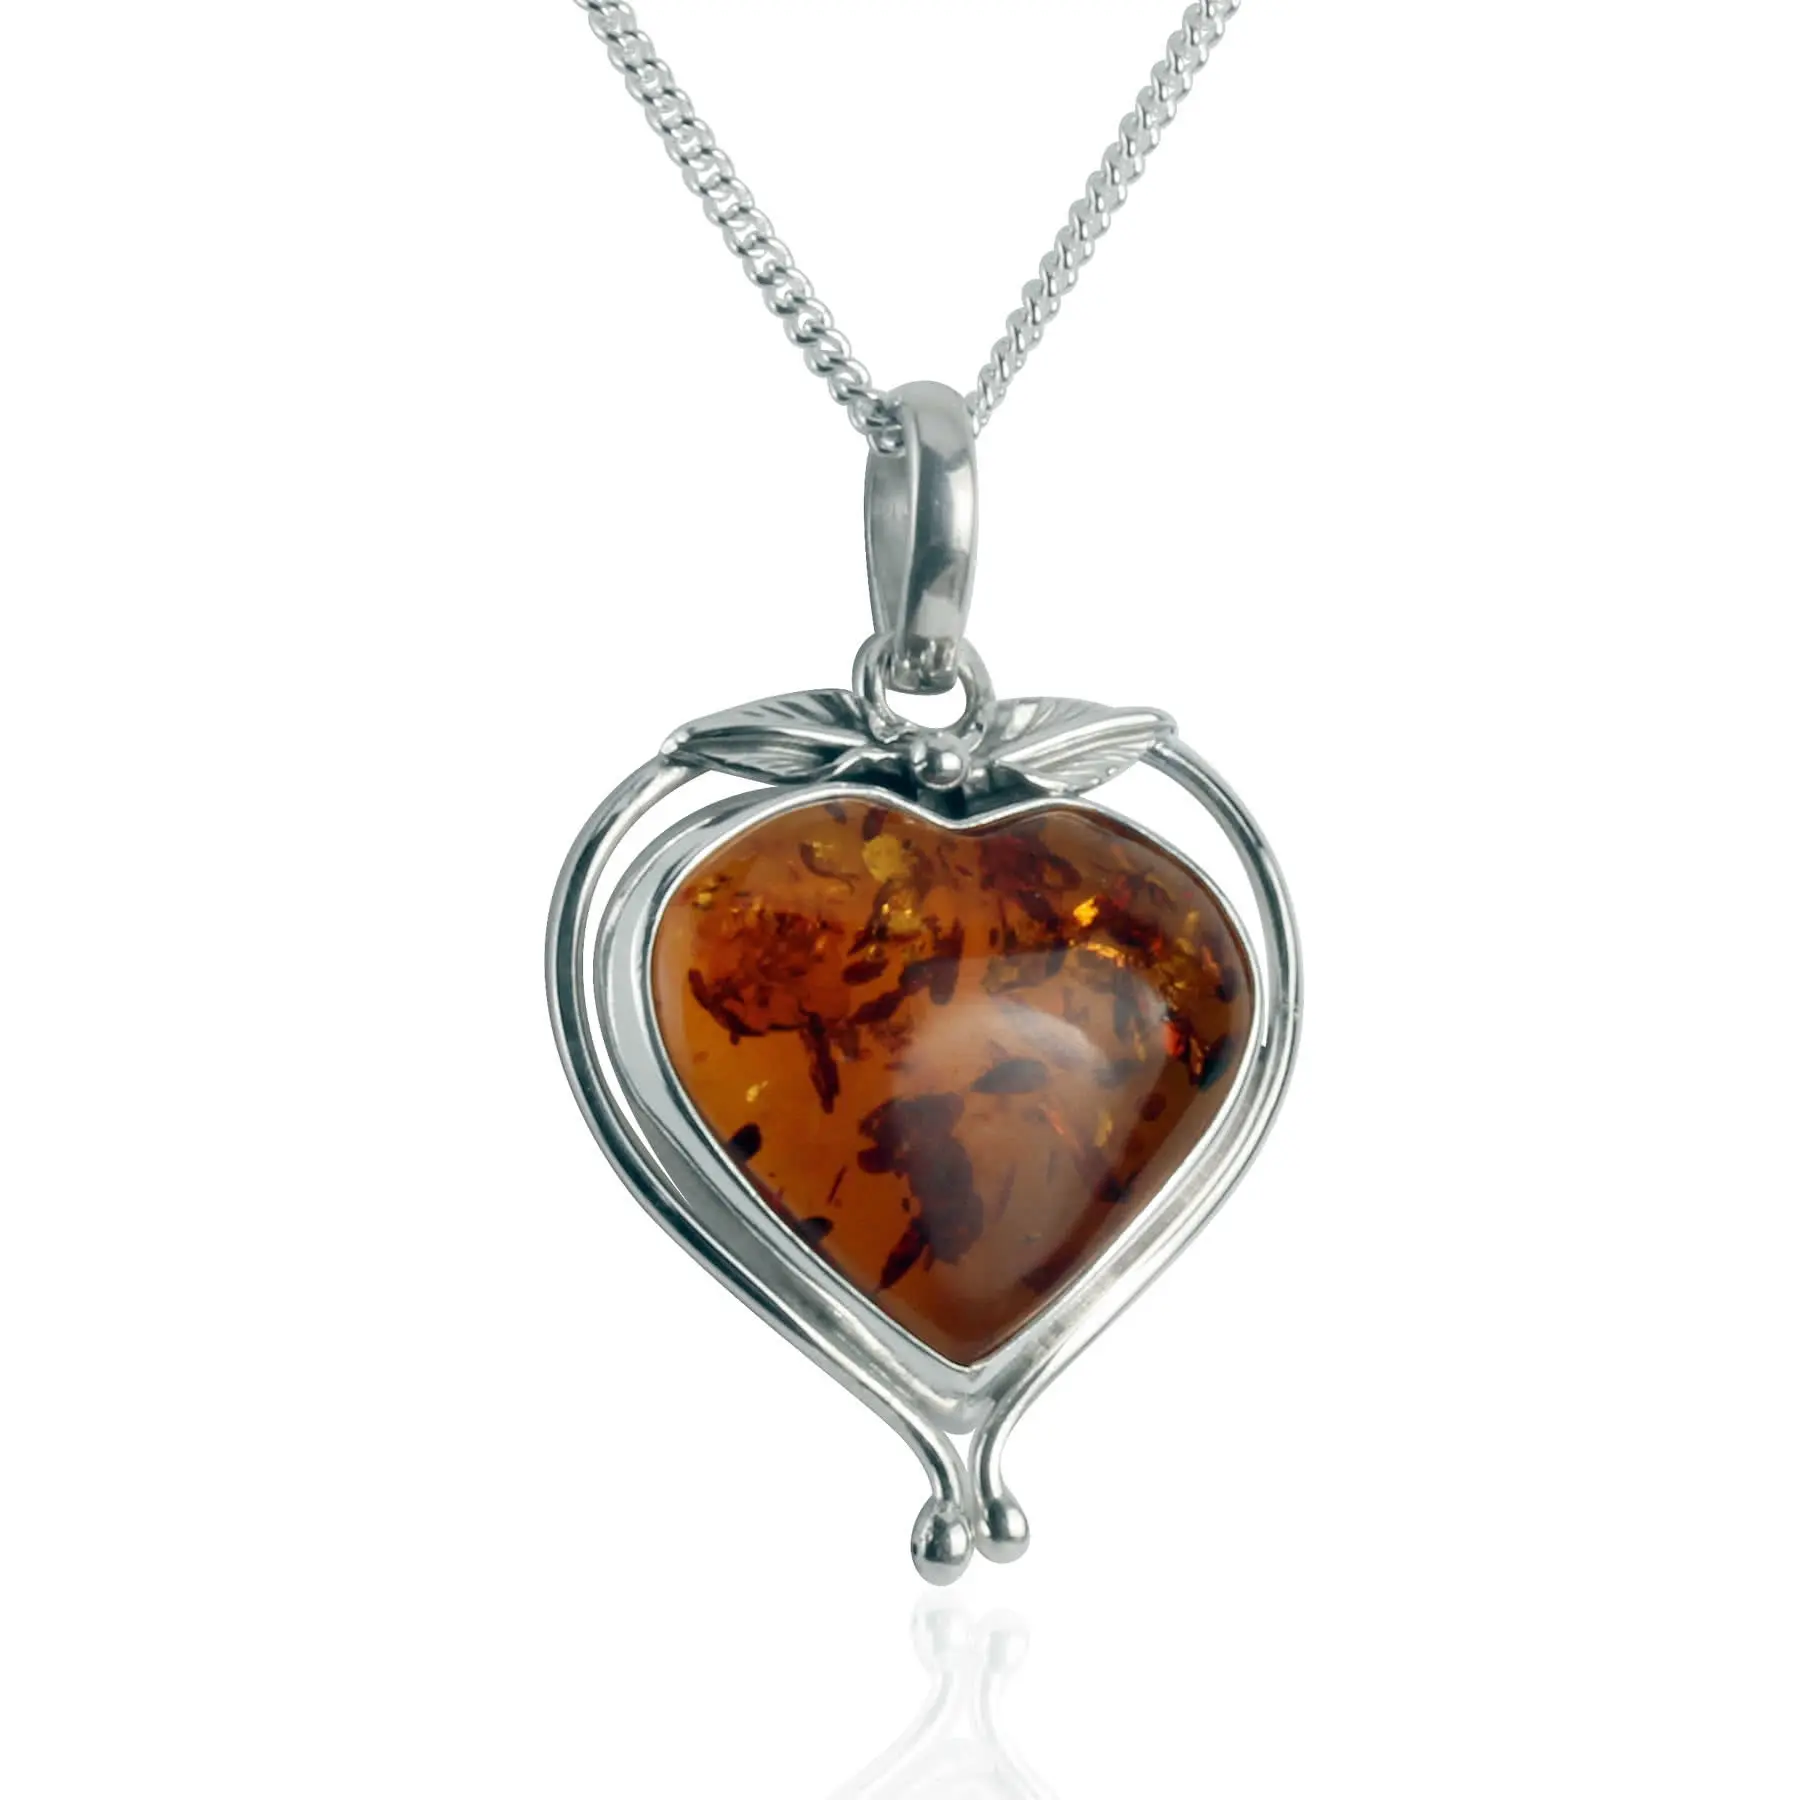 Amber Heart Pendant with Leaf Design